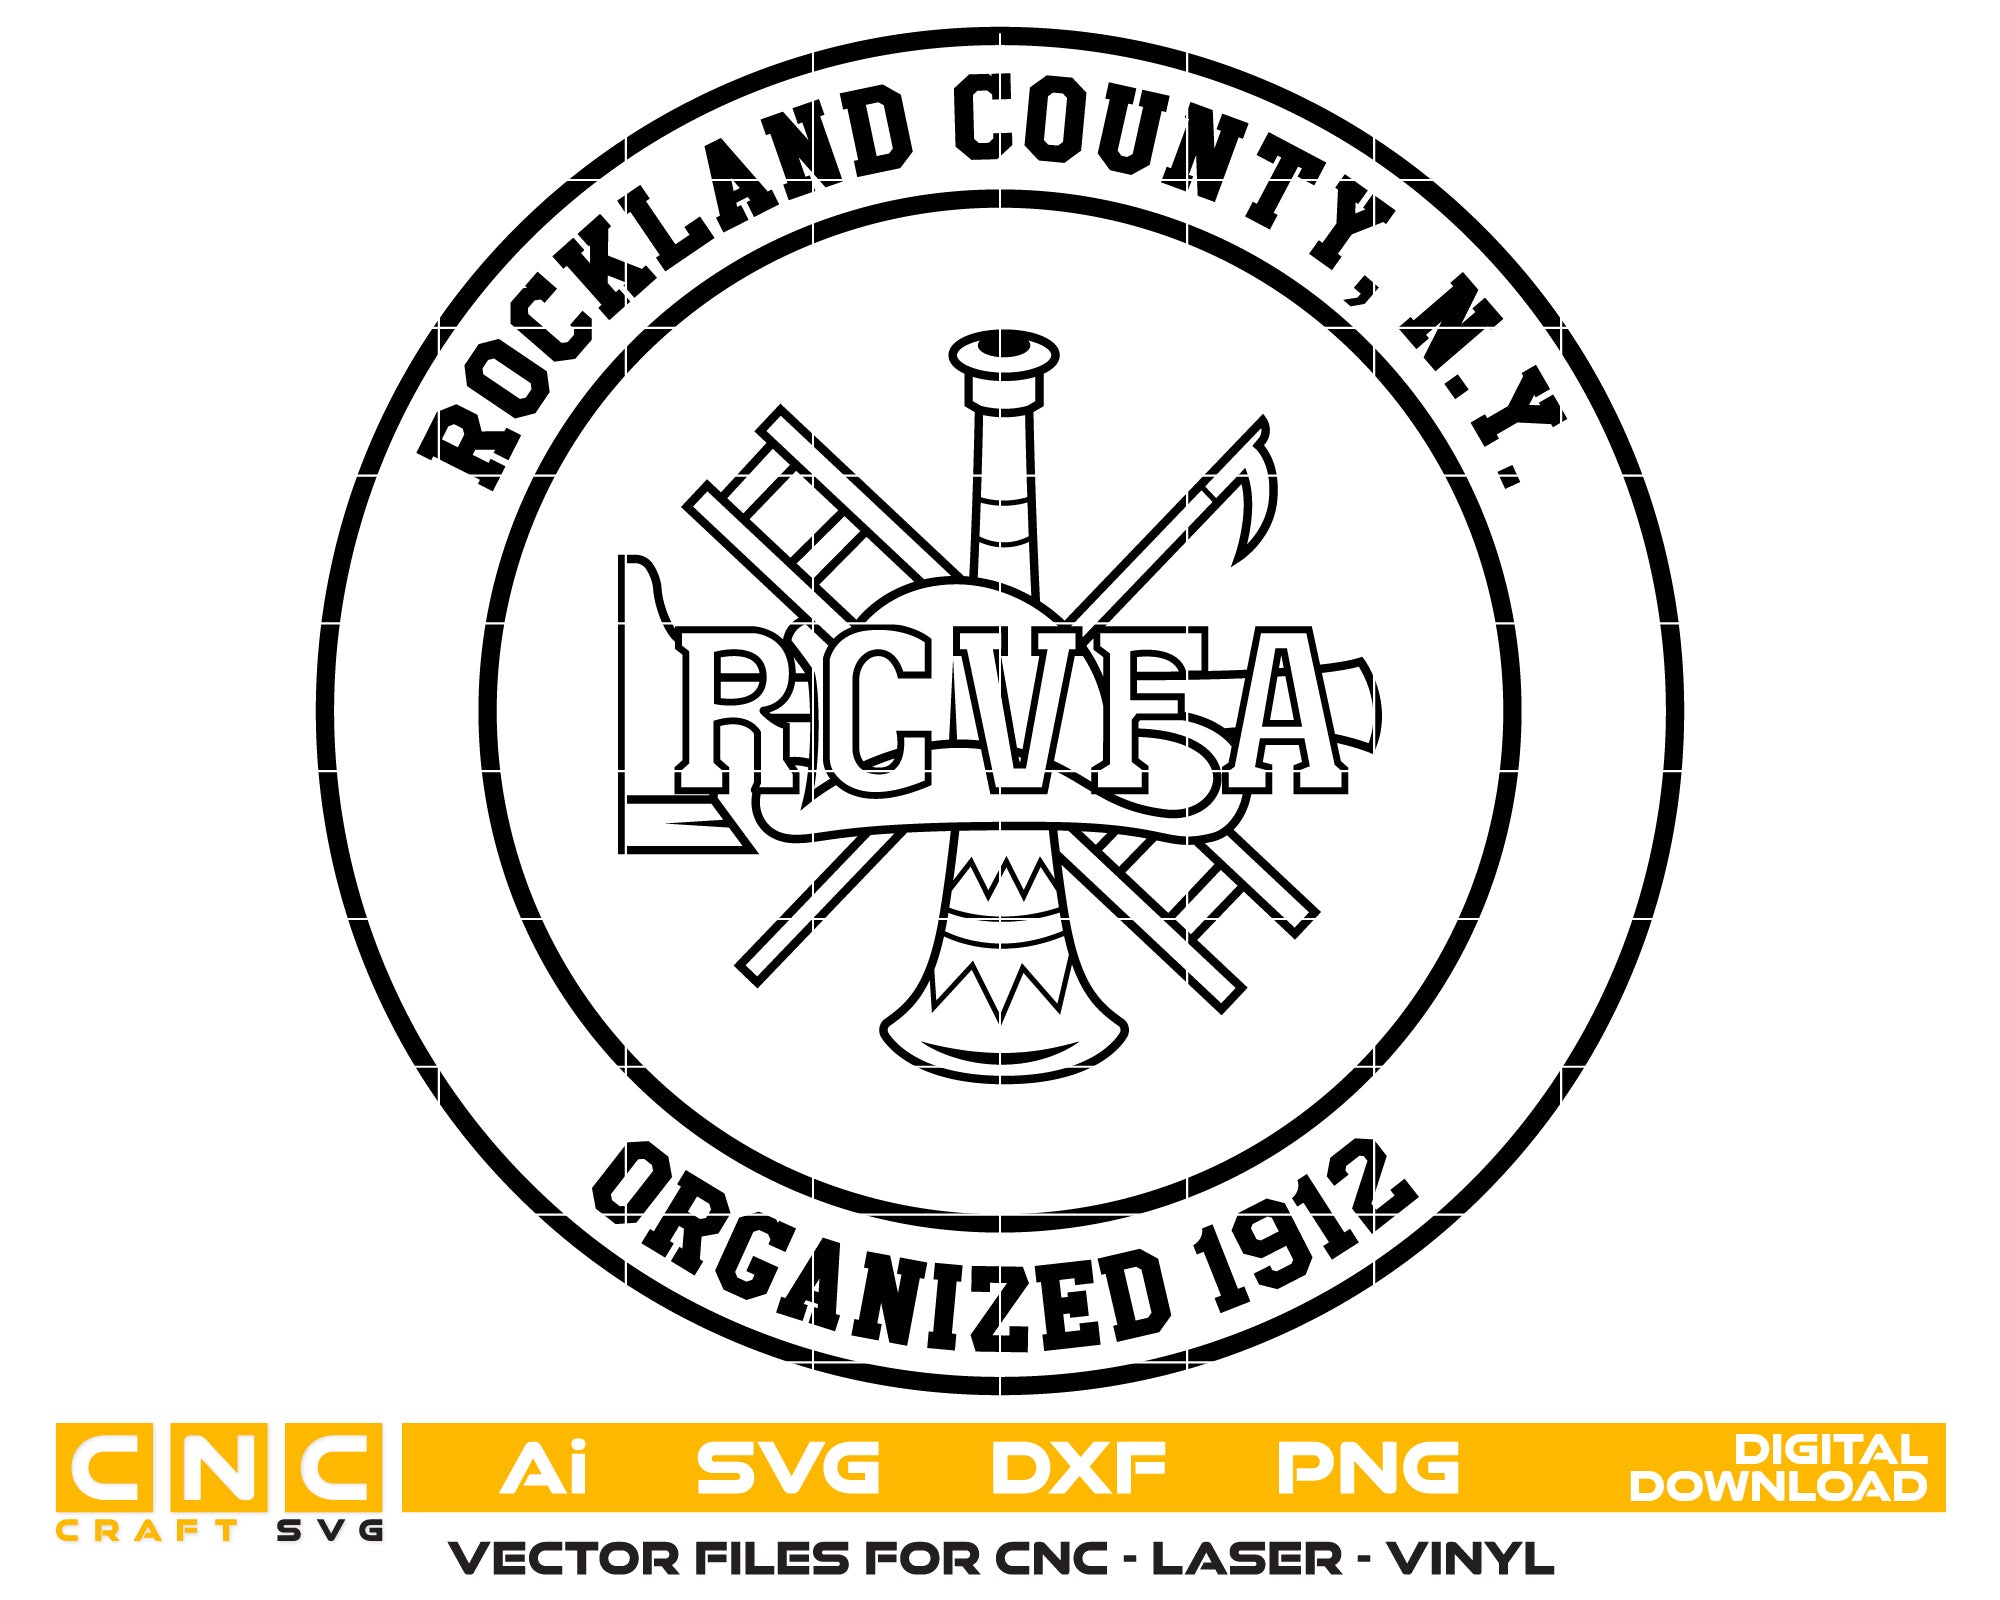 Rockland County New York Organized 1912 Vector Art, Ai,SVG, DXF, PNG, Digital Files